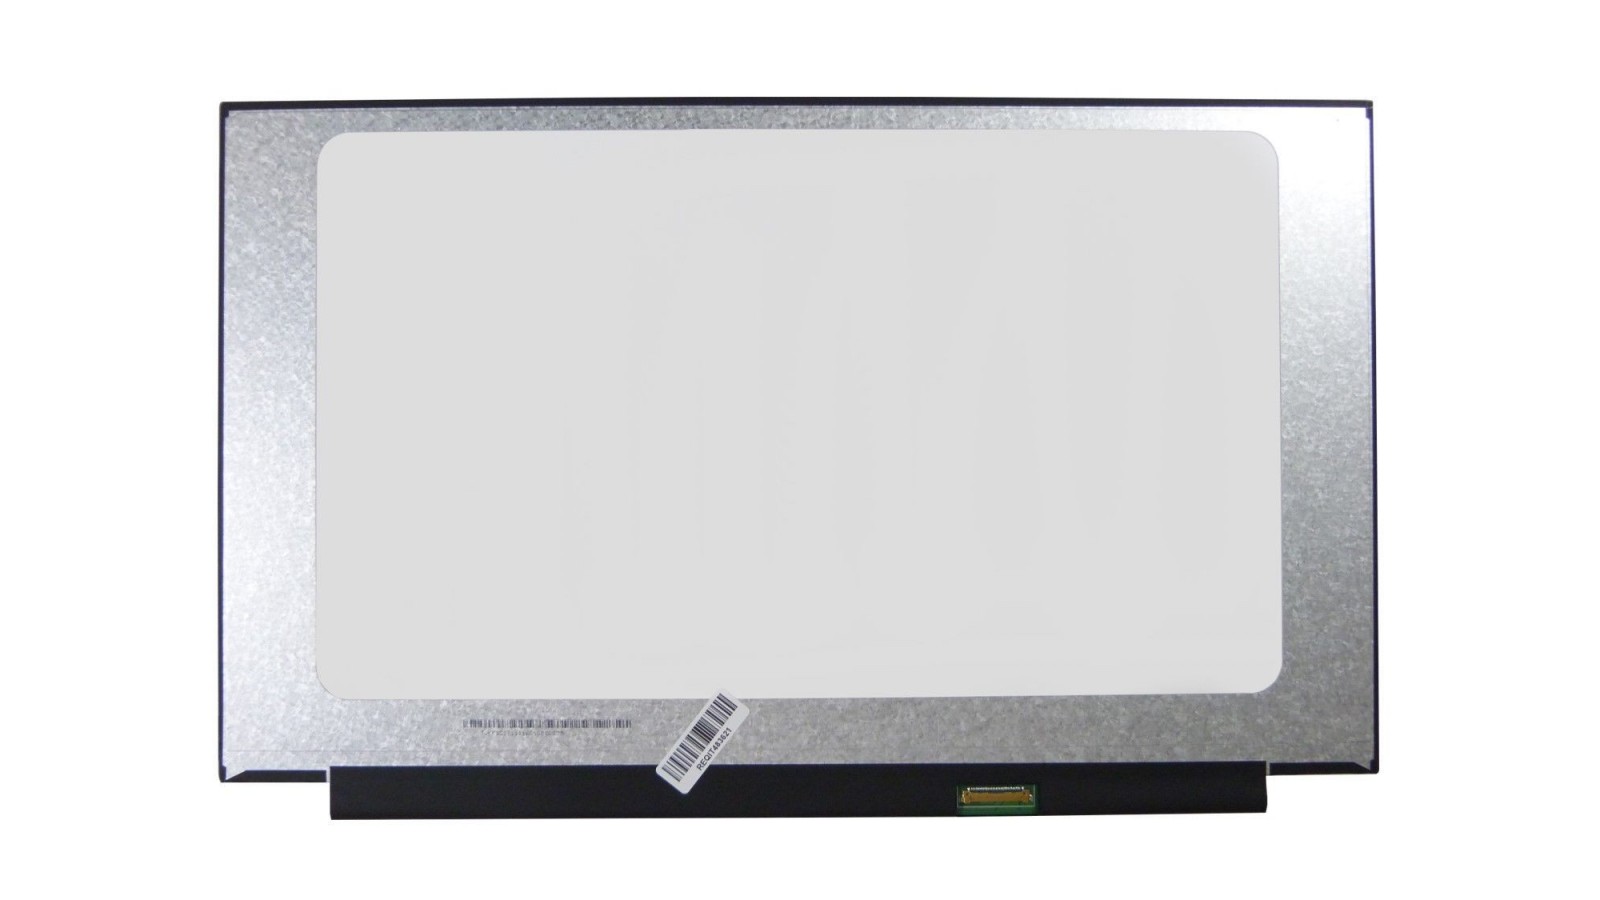 Display LCD Schermo 15,6 Led Per Acer Nitro 5 An515 54 Full Hd